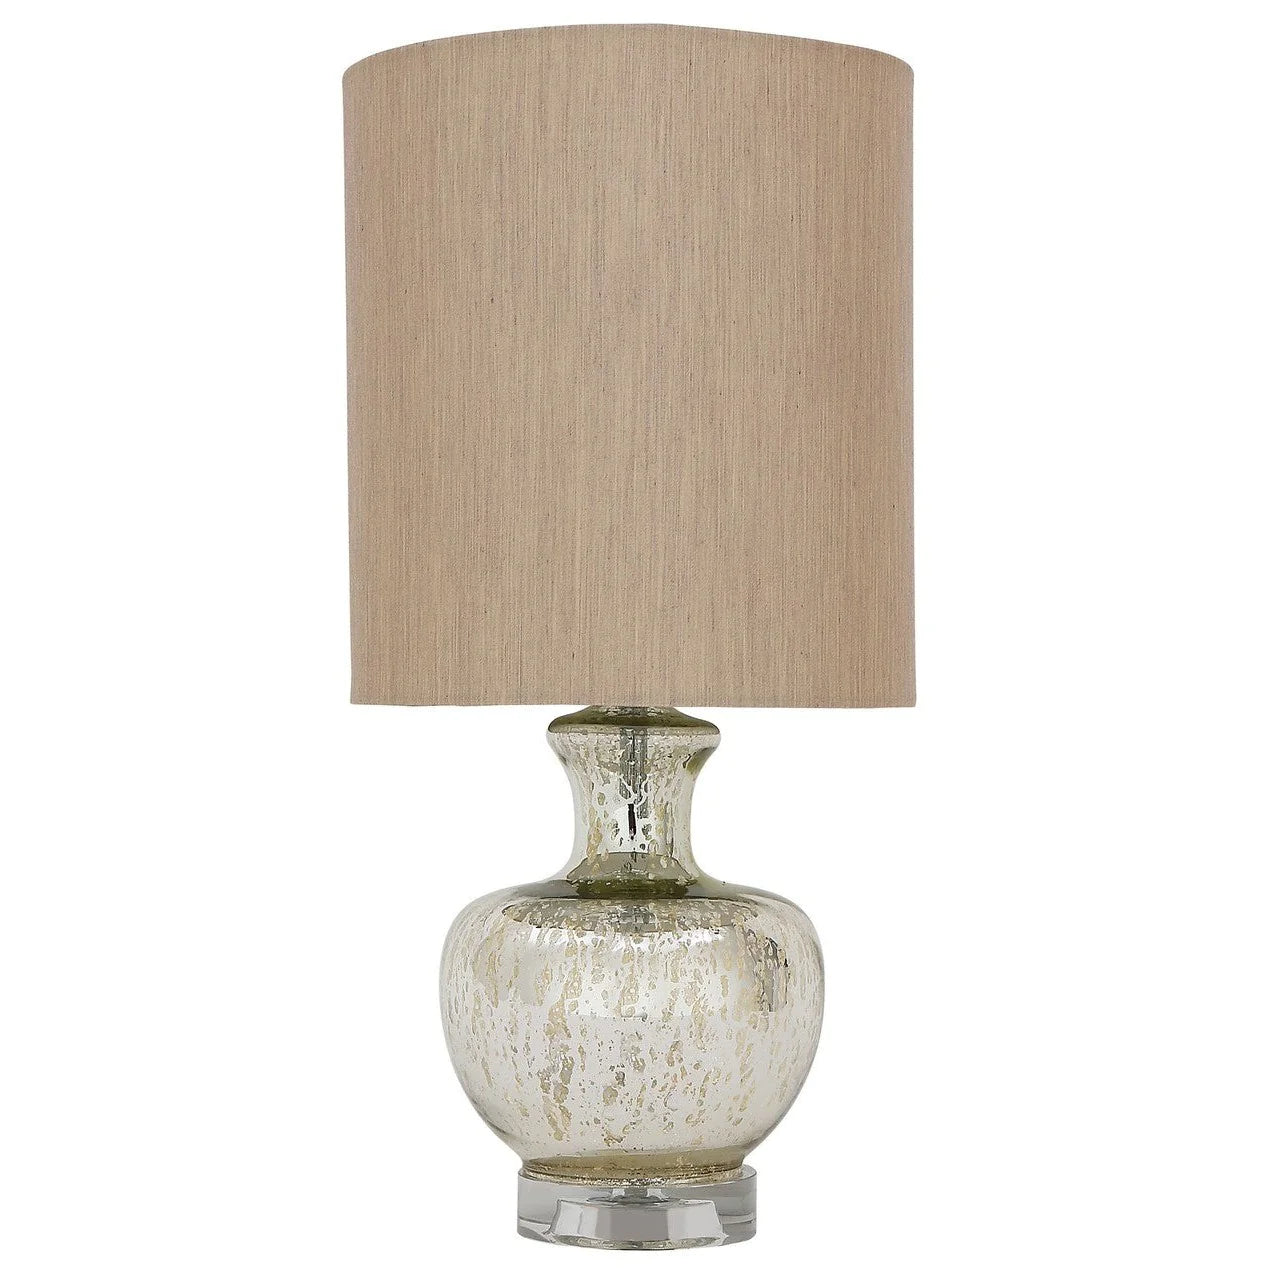 Tami lamp complete with shade reduced  clearance . Sold in pairs only